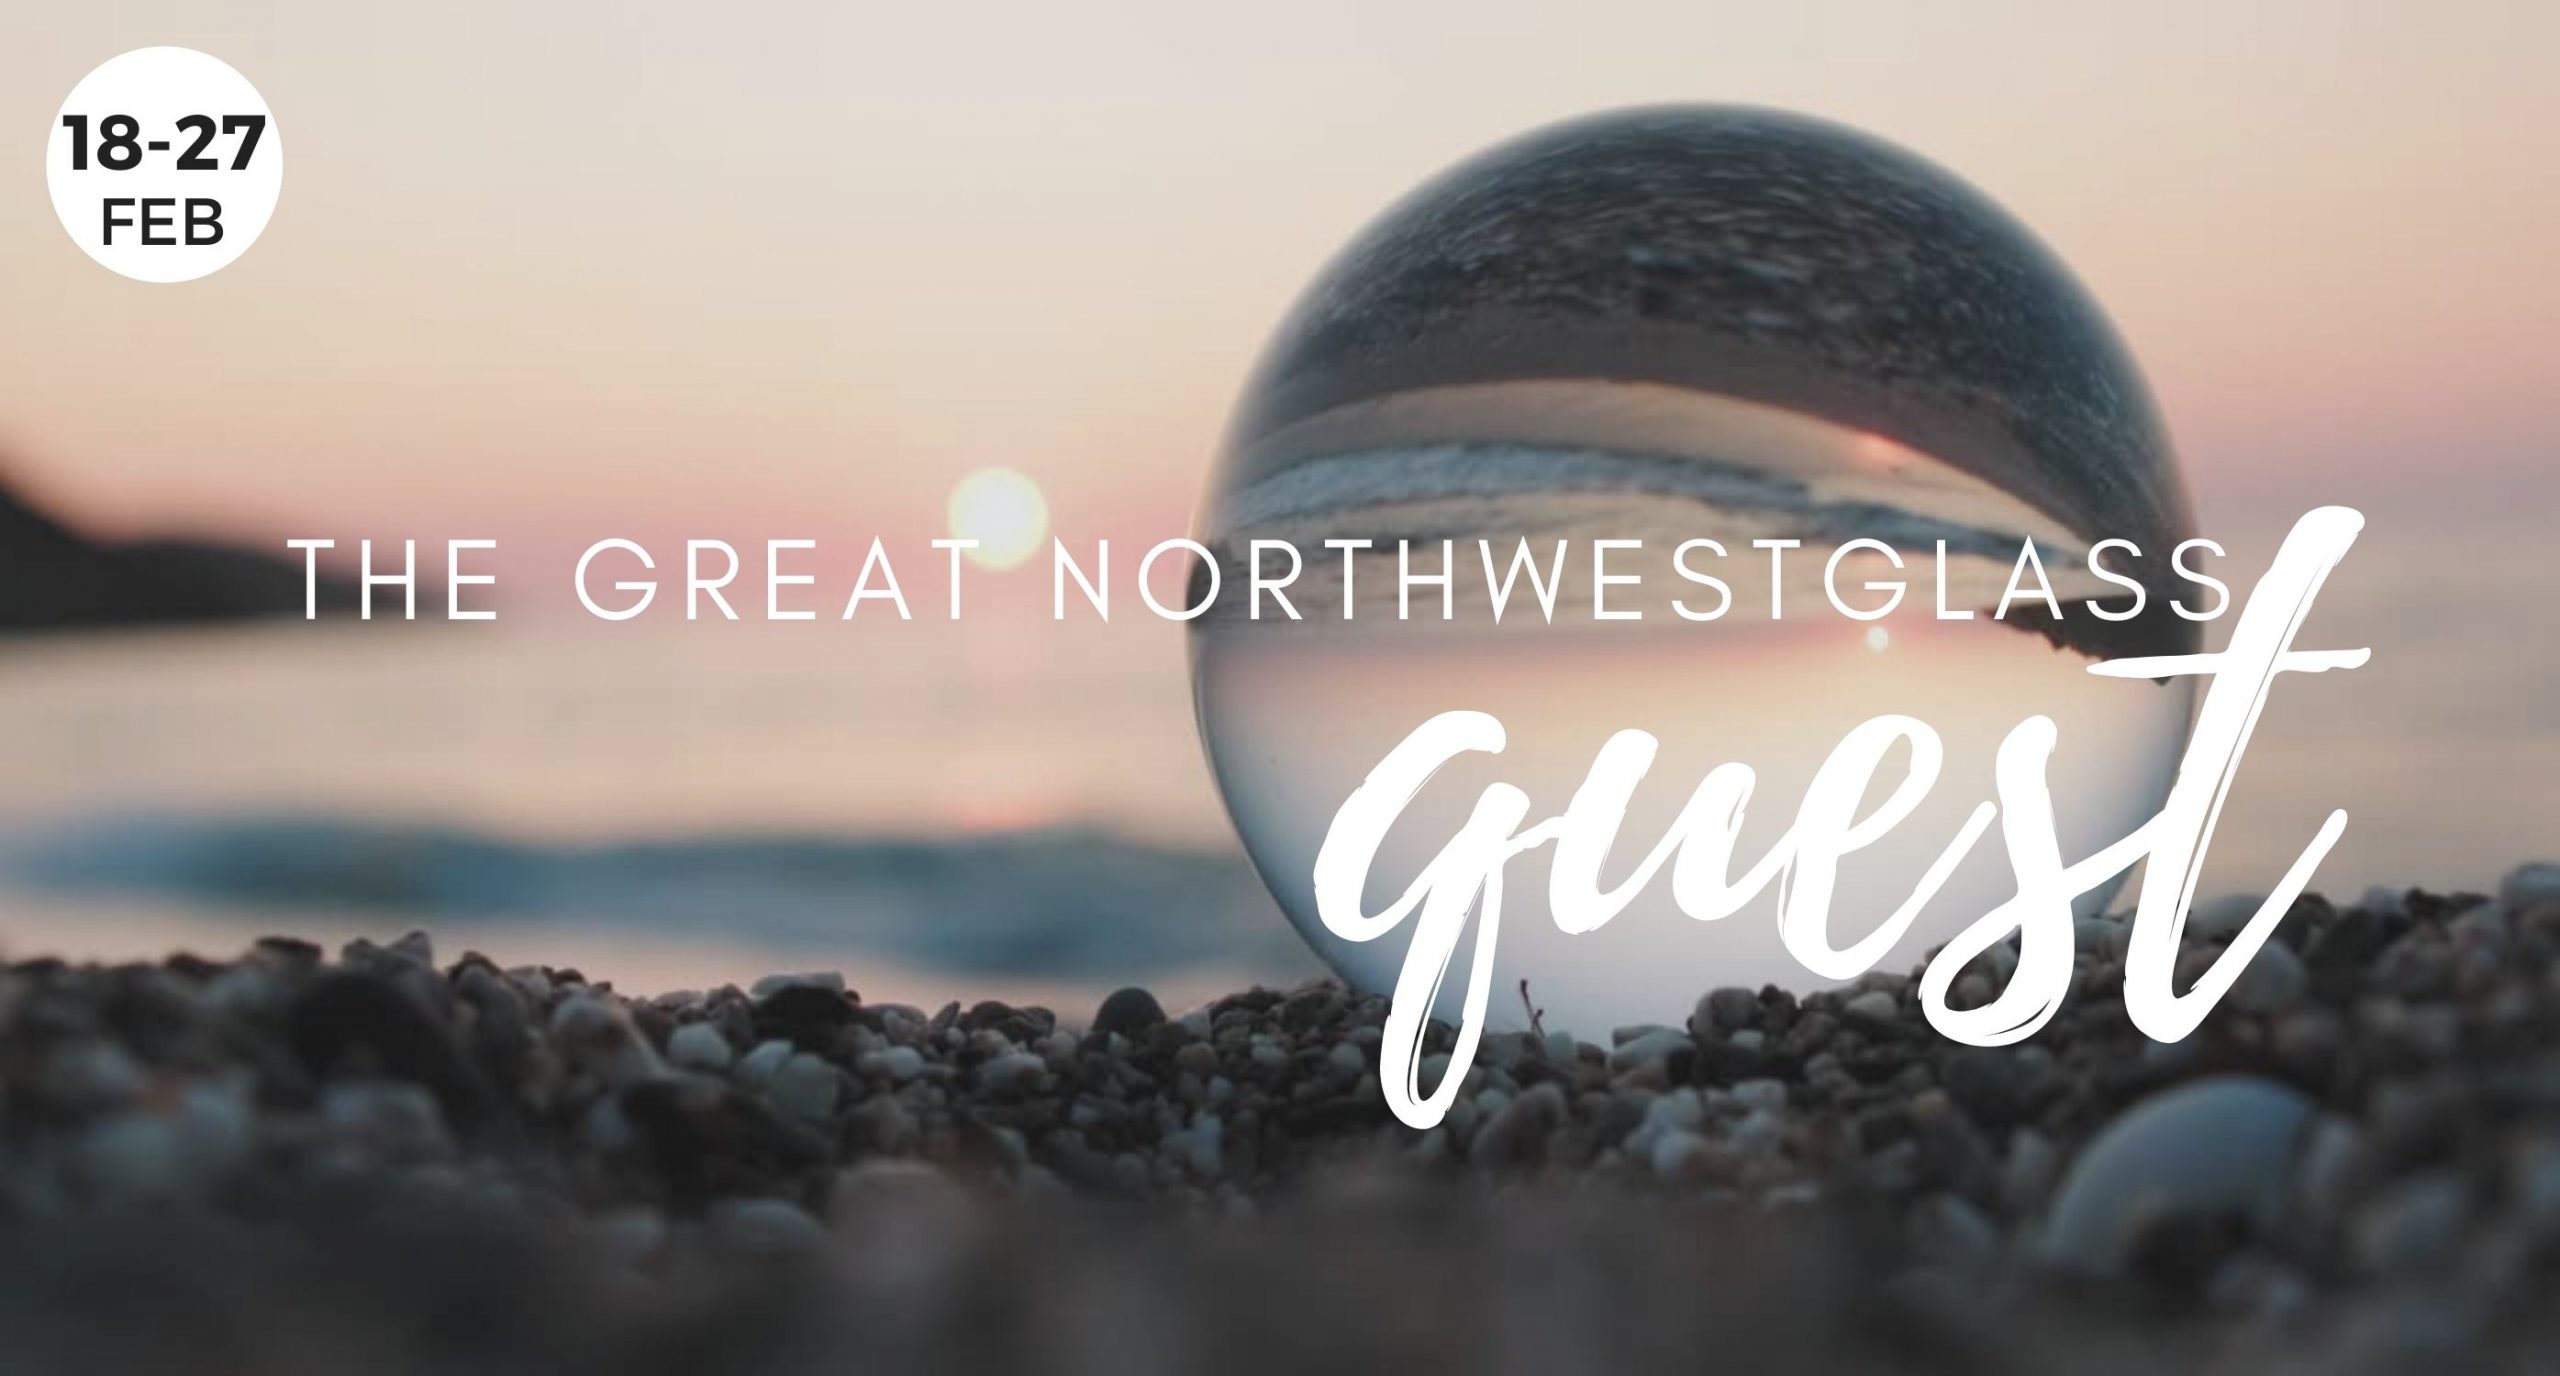 The Great Northwest Glass Quest